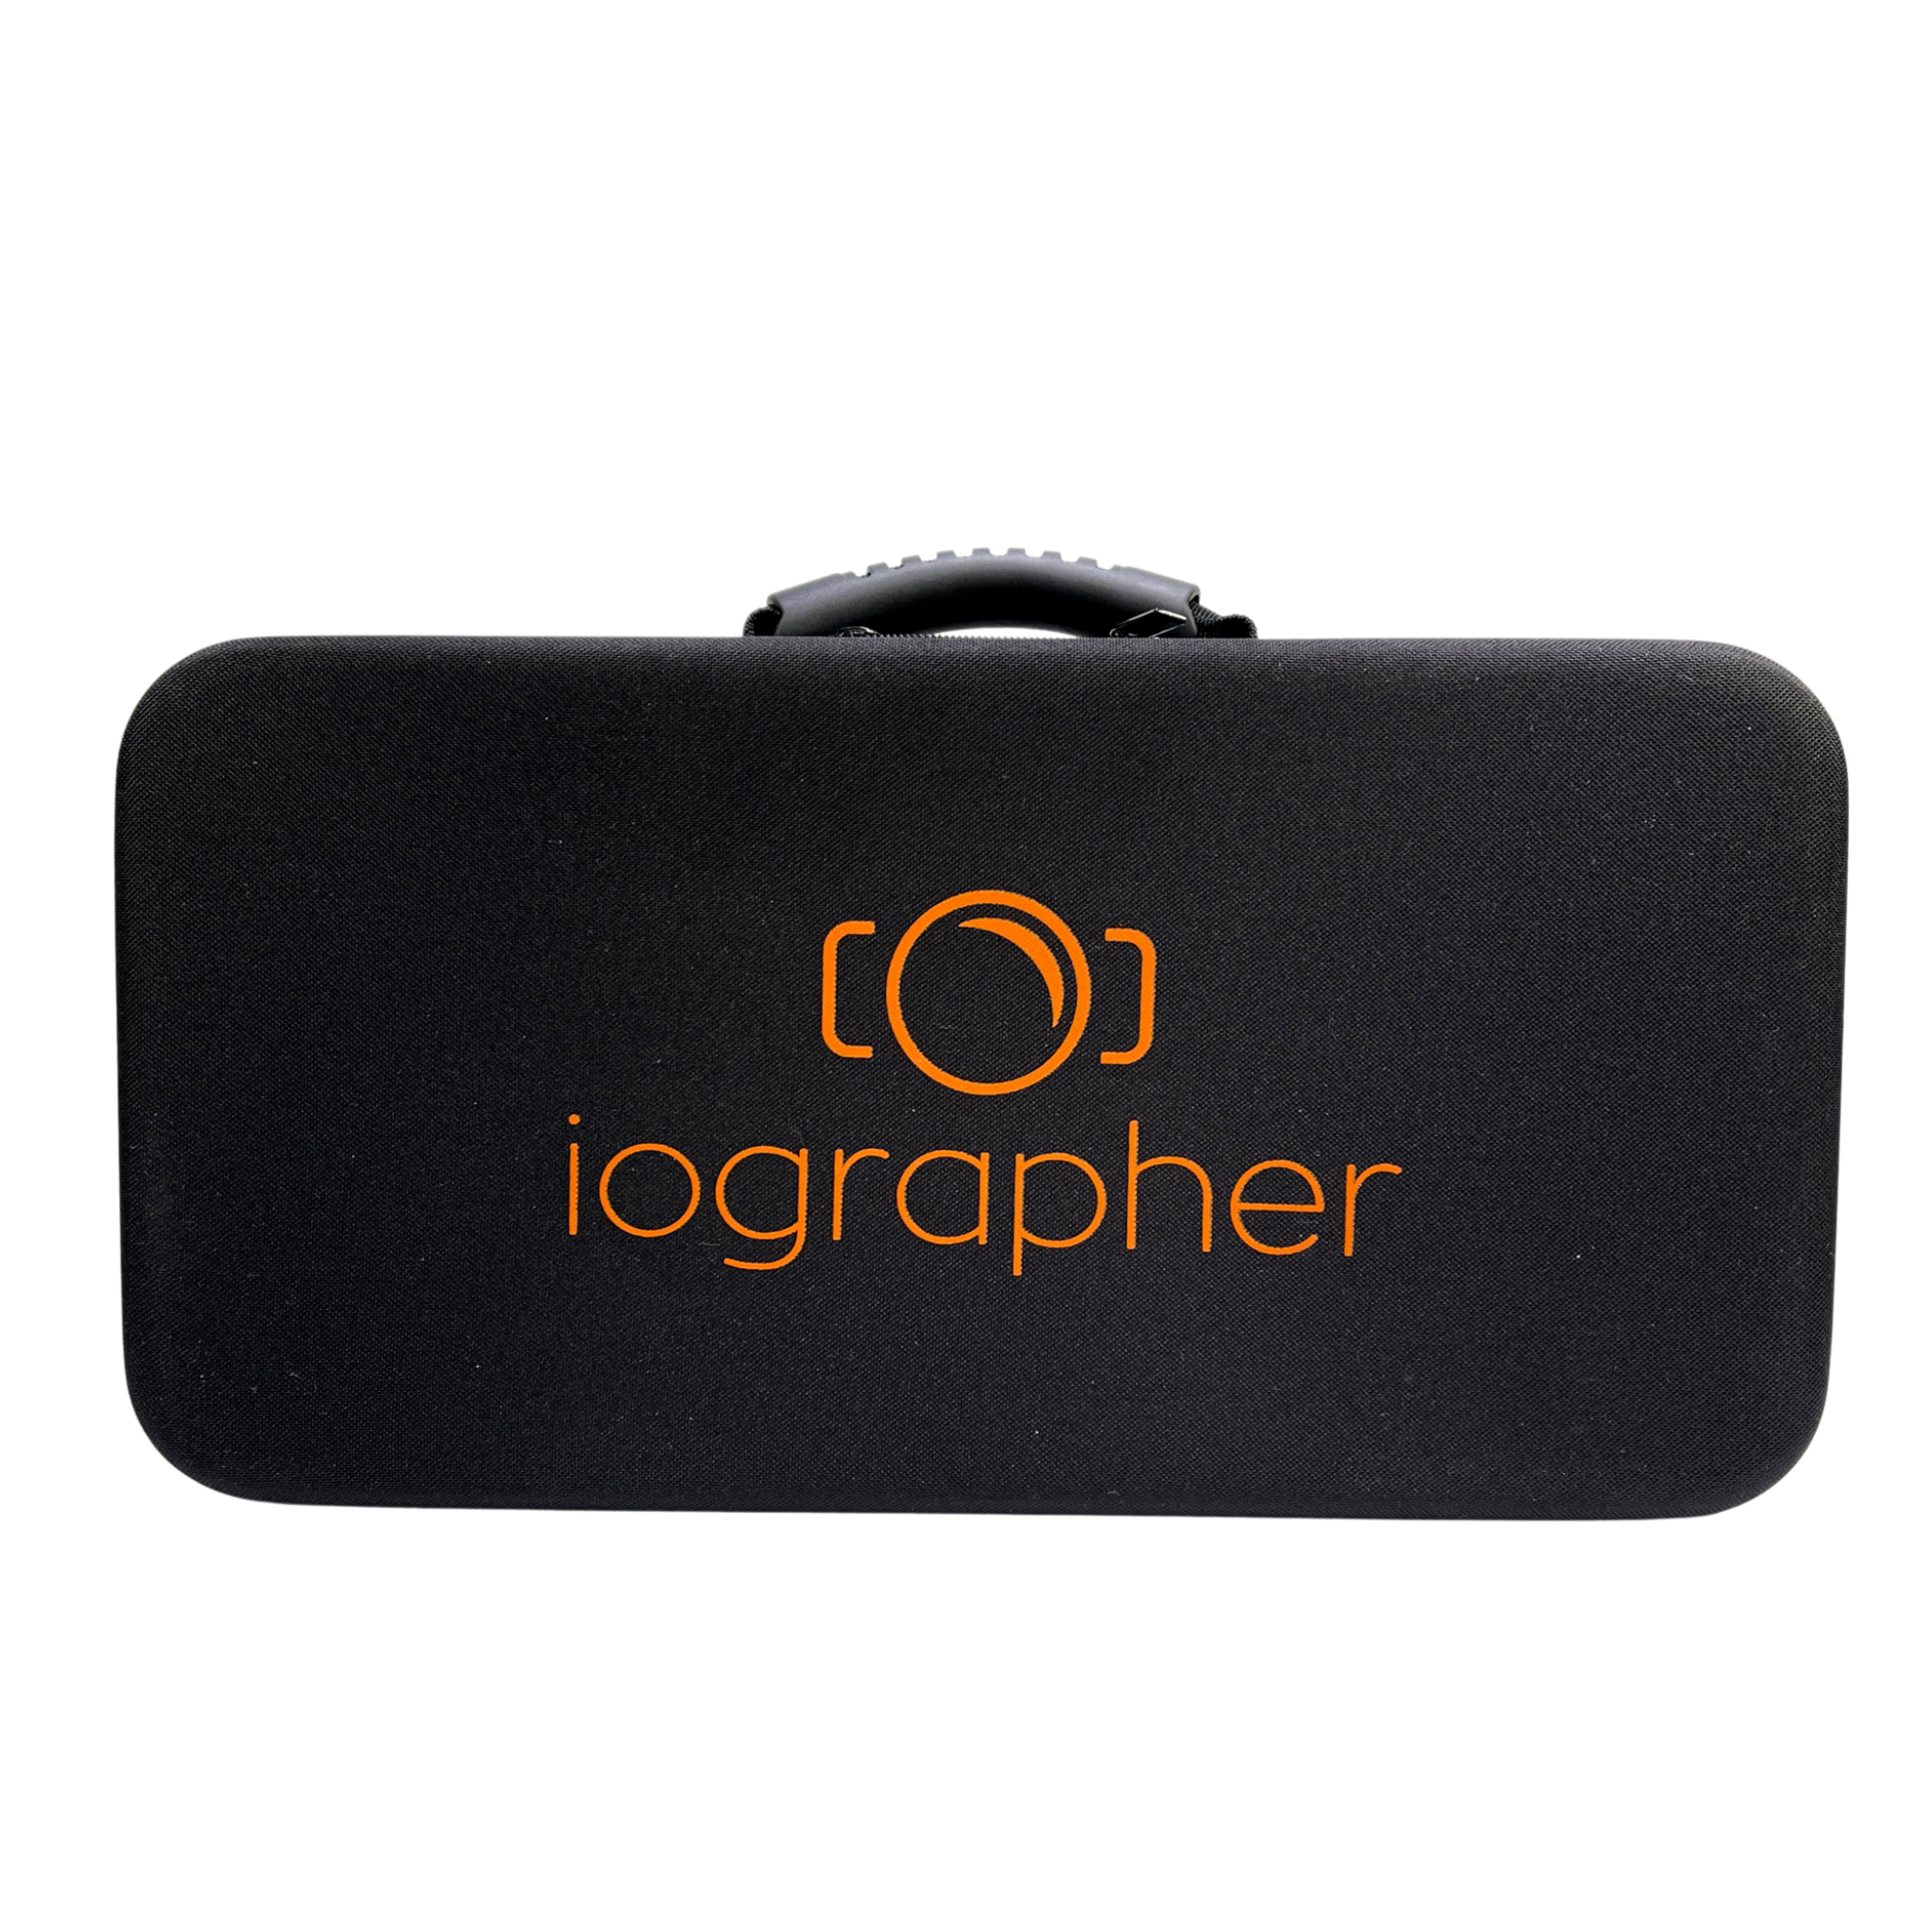 iOgrapher Multi Pro Case for iPad Pro 12.9, Pro 11, Air 4th Gen with Carry Case